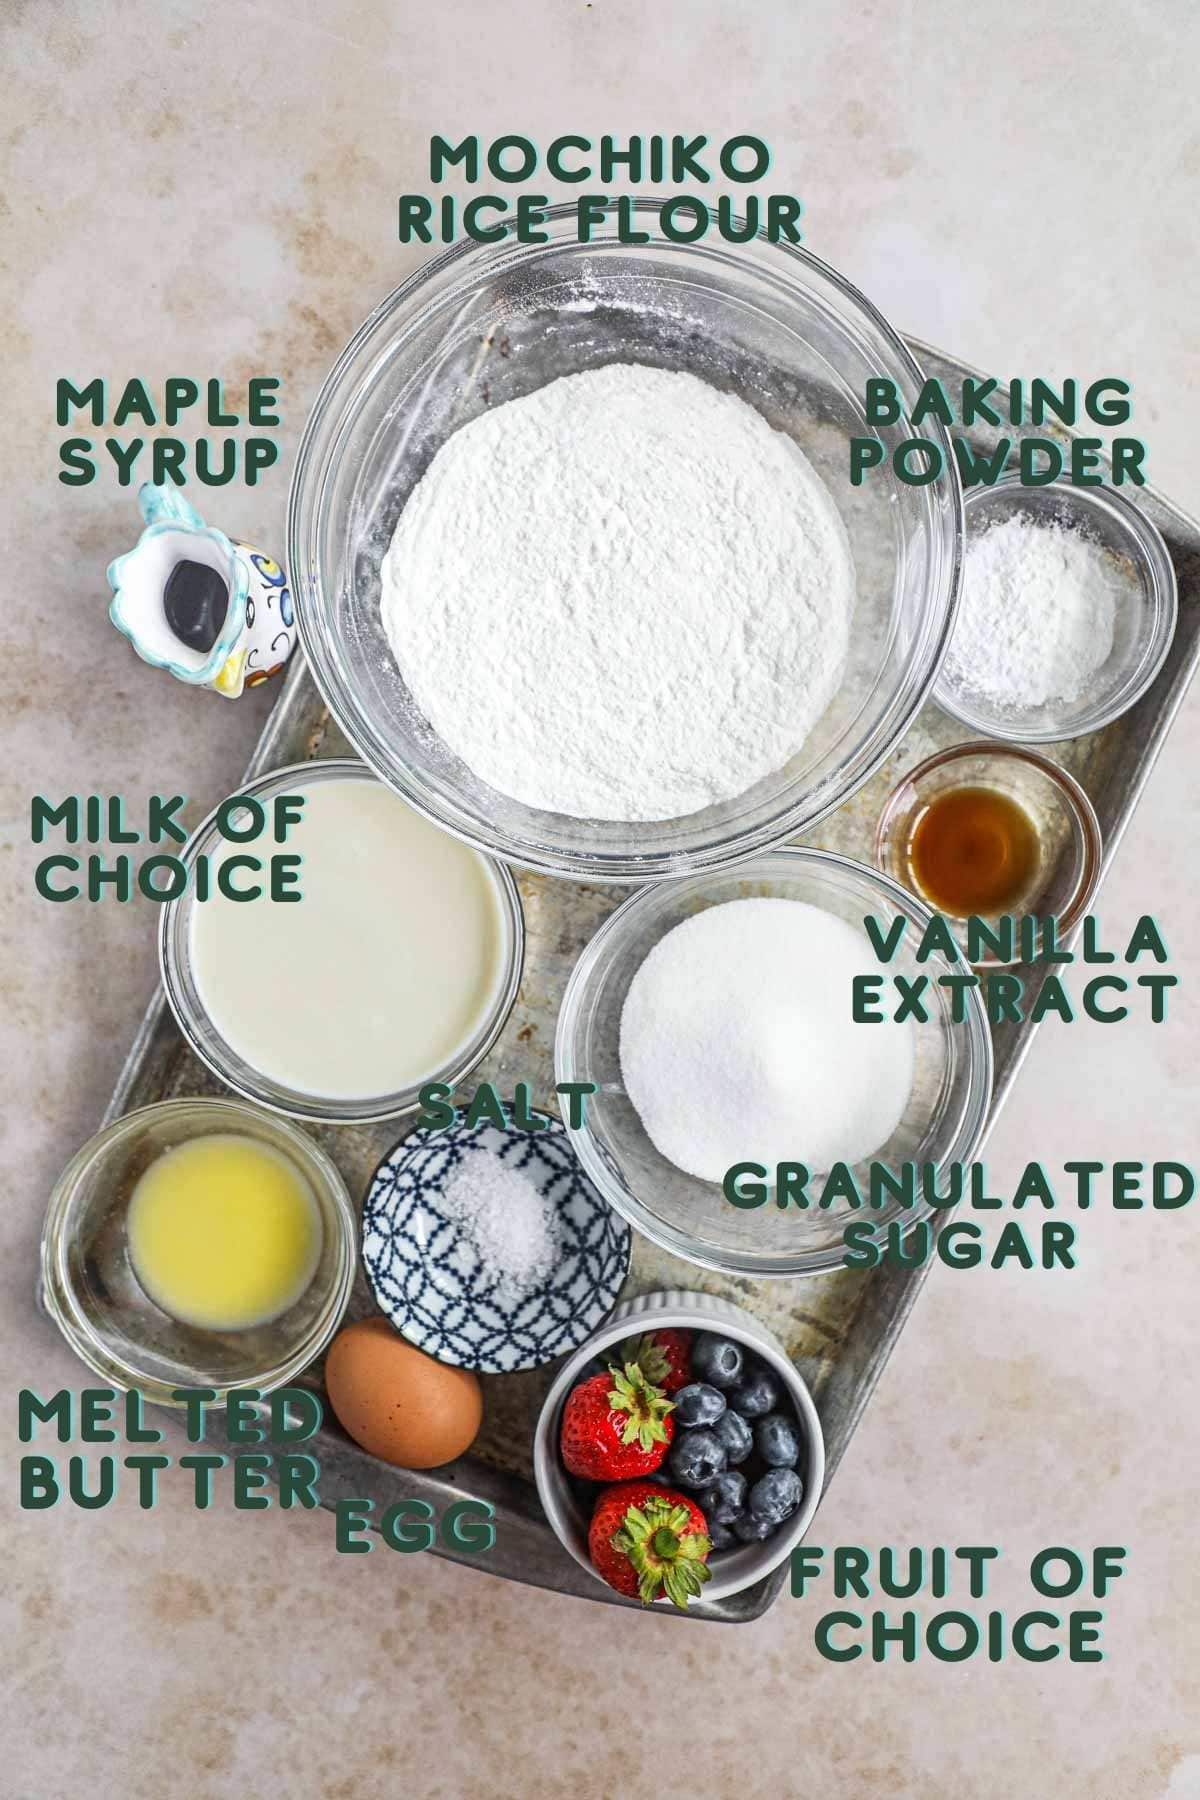 Ingredients to make easy, simple gluten-free mochi waffles, including mochiko rice four, milk, baking powder, vanilla extract, salt, granulated sugar, melted butter, egg, syrup, and fruit. 